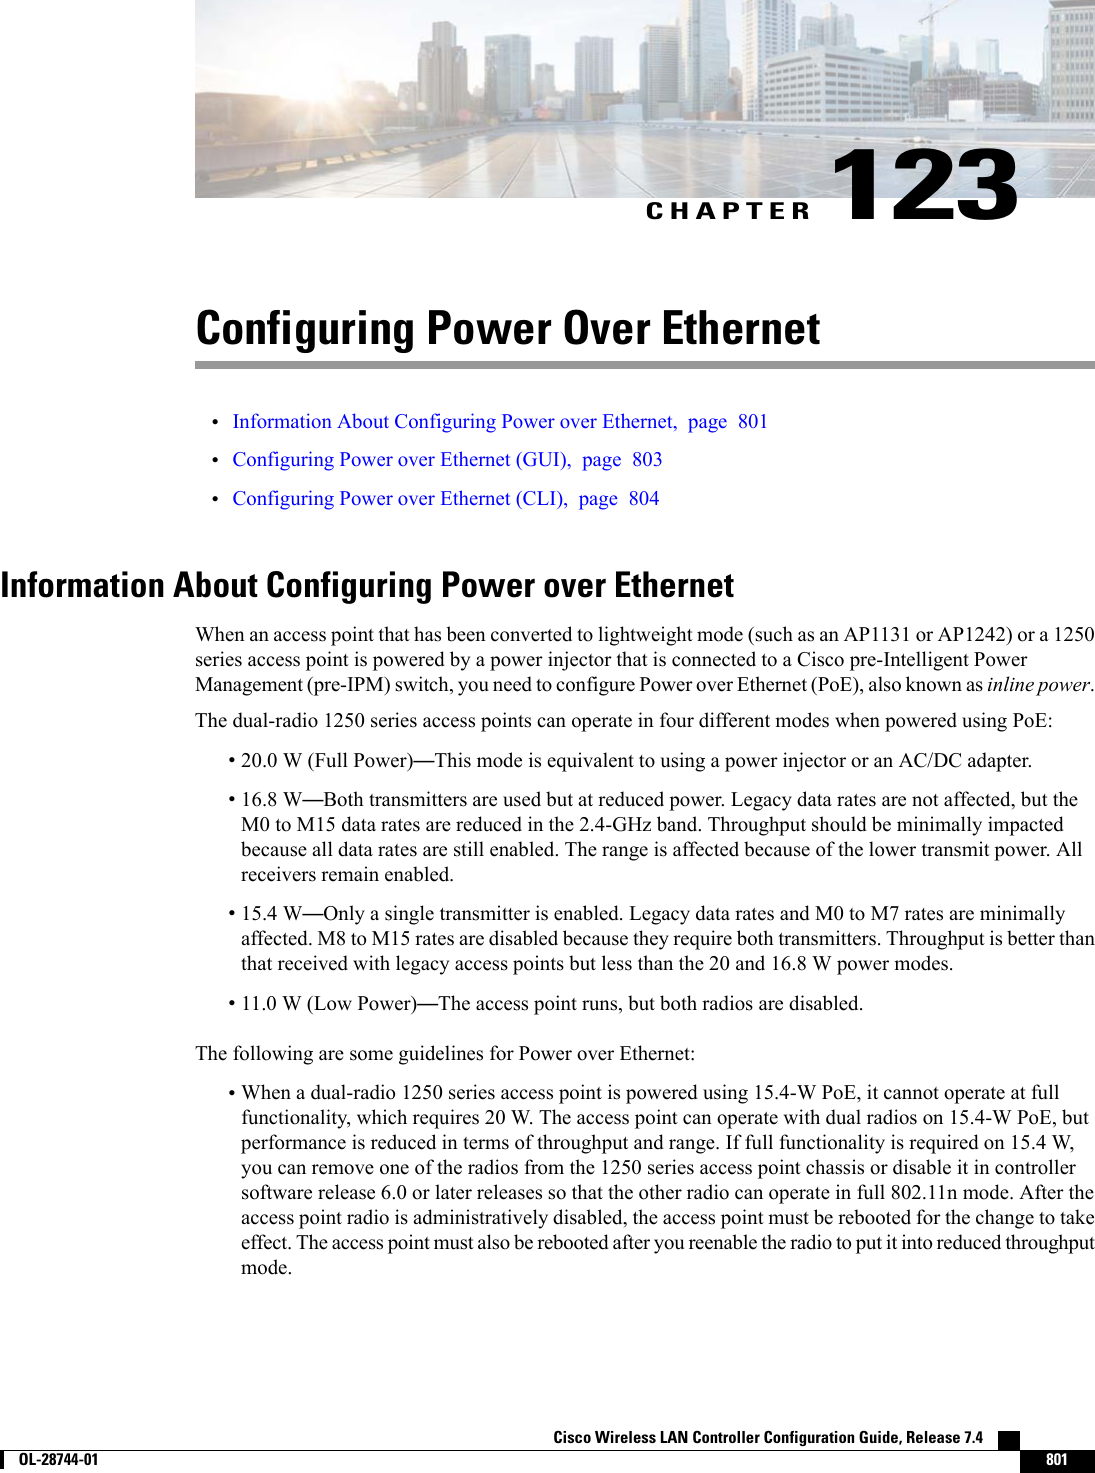 CHAPTER 123Configuring Power Over Ethernet•Information About Configuring Power over Ethernet, page 801•Configuring Power over Ethernet (GUI), page 803•Configuring Power over Ethernet (CLI), page 804Information About Configuring Power over EthernetWhen an access point that has been converted to lightweight mode (such as an AP1131 or AP1242) or a 1250series access point is powered by a power injector that is connected to a Cisco pre-Intelligent PowerManagement (pre-IPM) switch, you need to configure Power over Ethernet (PoE), also known as inline power.The dual-radio 1250 series access points can operate in four different modes when powered using PoE:•20.0 W (Full Power)—This mode is equivalent to using a power injector or an AC/DC adapter.•16.8 W—Both transmitters are used but at reduced power. Legacy data rates are not affected, but theM0 to M15 data rates are reduced in the 2.4-GHz band. Throughput should be minimally impactedbecause all data rates are still enabled. The range is affected because of the lower transmit power. Allreceivers remain enabled.•15.4 W—Only a single transmitter is enabled. Legacy data rates and M0 to M7 rates are minimallyaffected. M8 to M15 rates are disabled because they require both transmitters. Throughput is better thanthat received with legacy access points but less than the 20 and 16.8 W power modes.•11.0 W (Low Power)—The access point runs, but both radios are disabled.The following are some guidelines for Power over Ethernet:•When a dual-radio 1250 series access point is powered using 15.4-W PoE, it cannot operate at fullfunctionality, which requires 20 W. The access point can operate with dual radios on 15.4-W PoE, butperformance is reduced in terms of throughput and range. If full functionality is required on 15.4 W,you can remove one of the radios from the 1250 series access point chassis or disable it in controllersoftware release 6.0 or later releases so that the other radio can operate in full 802.11n mode. After theaccess point radio is administratively disabled, the access point must be rebooted for the change to takeeffect. The access point must also be rebooted after you reenable the radio to put it into reduced throughputmode.Cisco Wireless LAN Controller Configuration Guide, Release 7.4        OL-28744-01 801